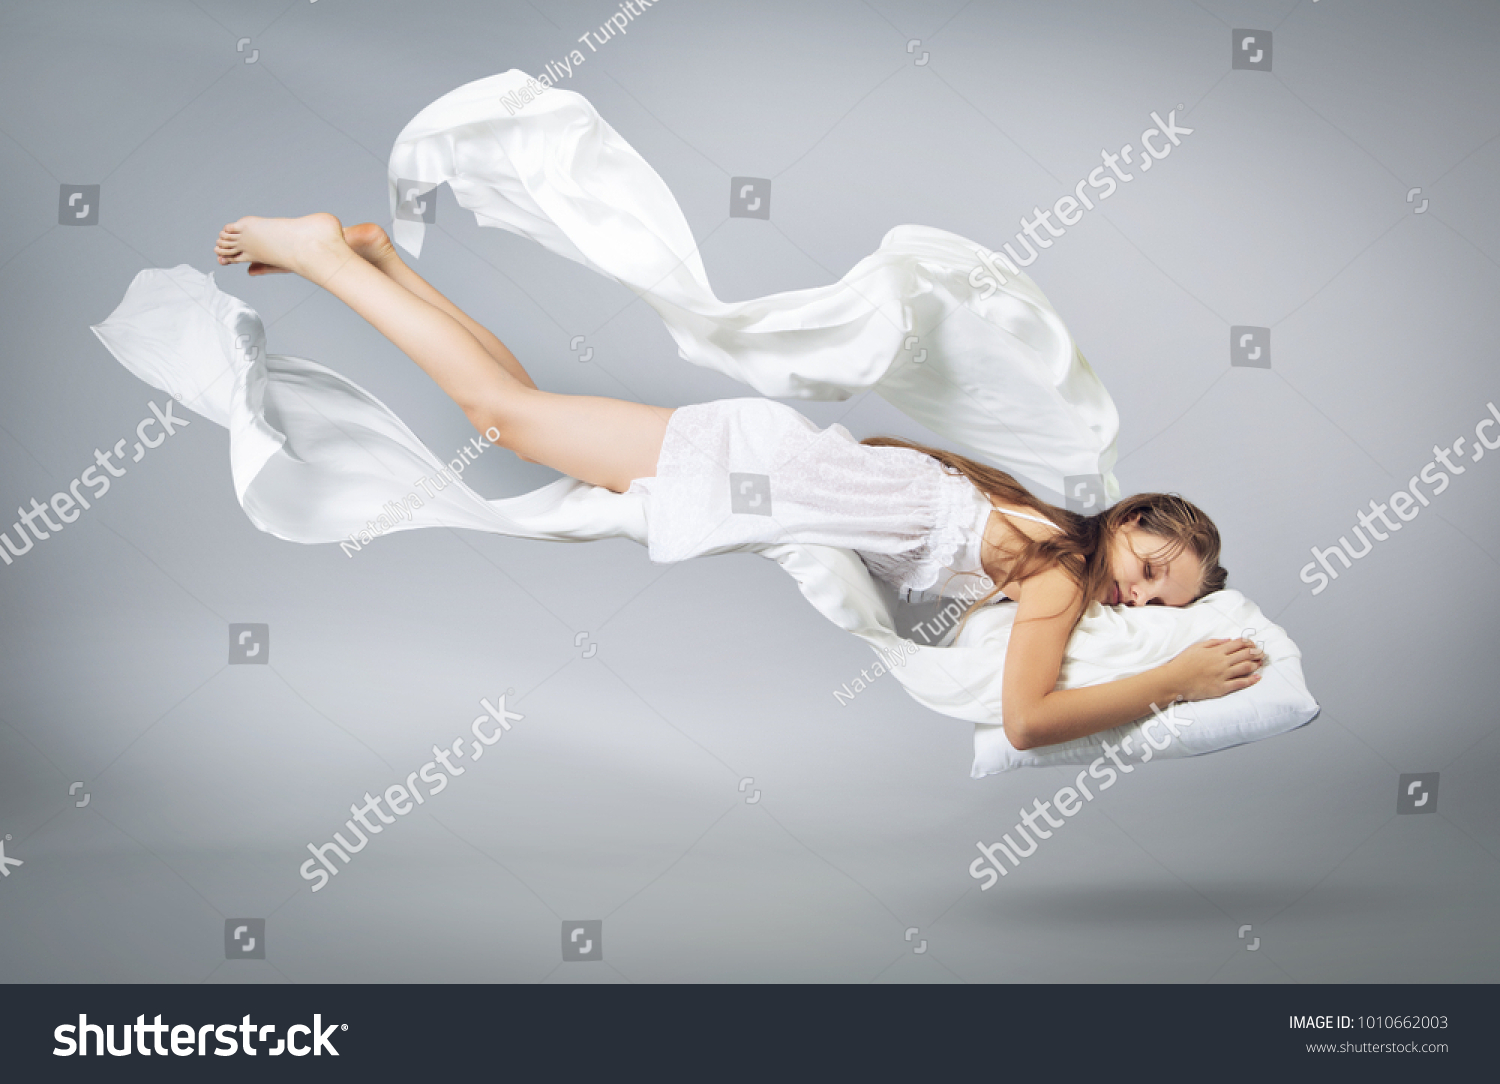 Sleeping girl. Flying in a dream. White linen flying through the air. Light grey background #1010662003